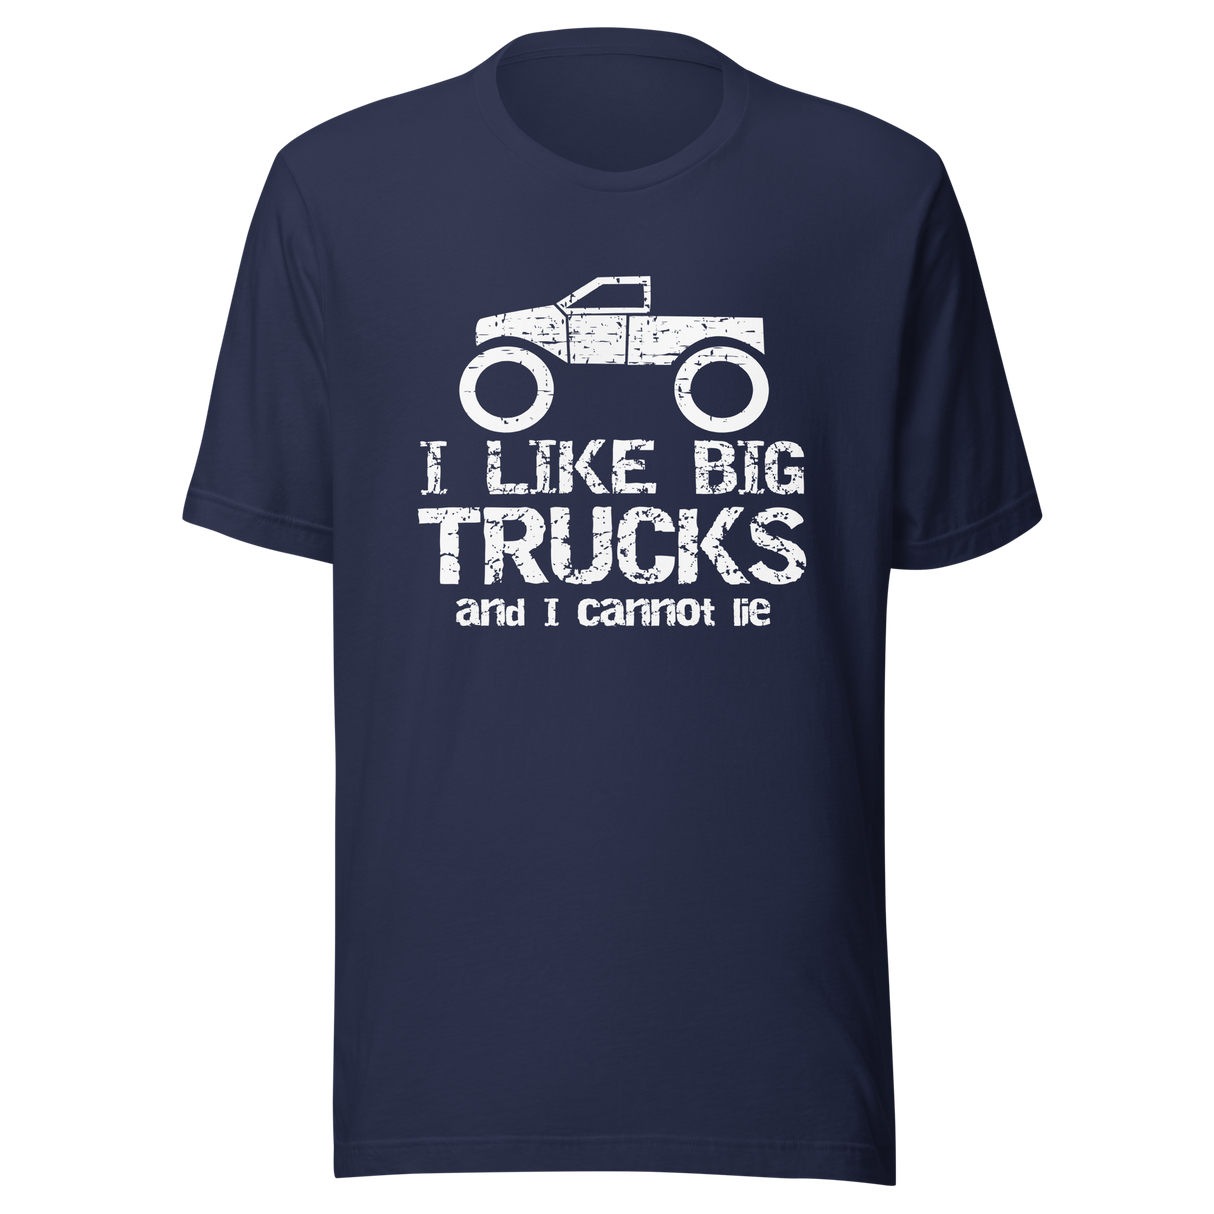 i-like-big-trucks-and-i-cannot-lie-truck-tee-monster-truck-t-shirt-big-truck-tee-boys-t-shirt-unisex-tee#color_navy